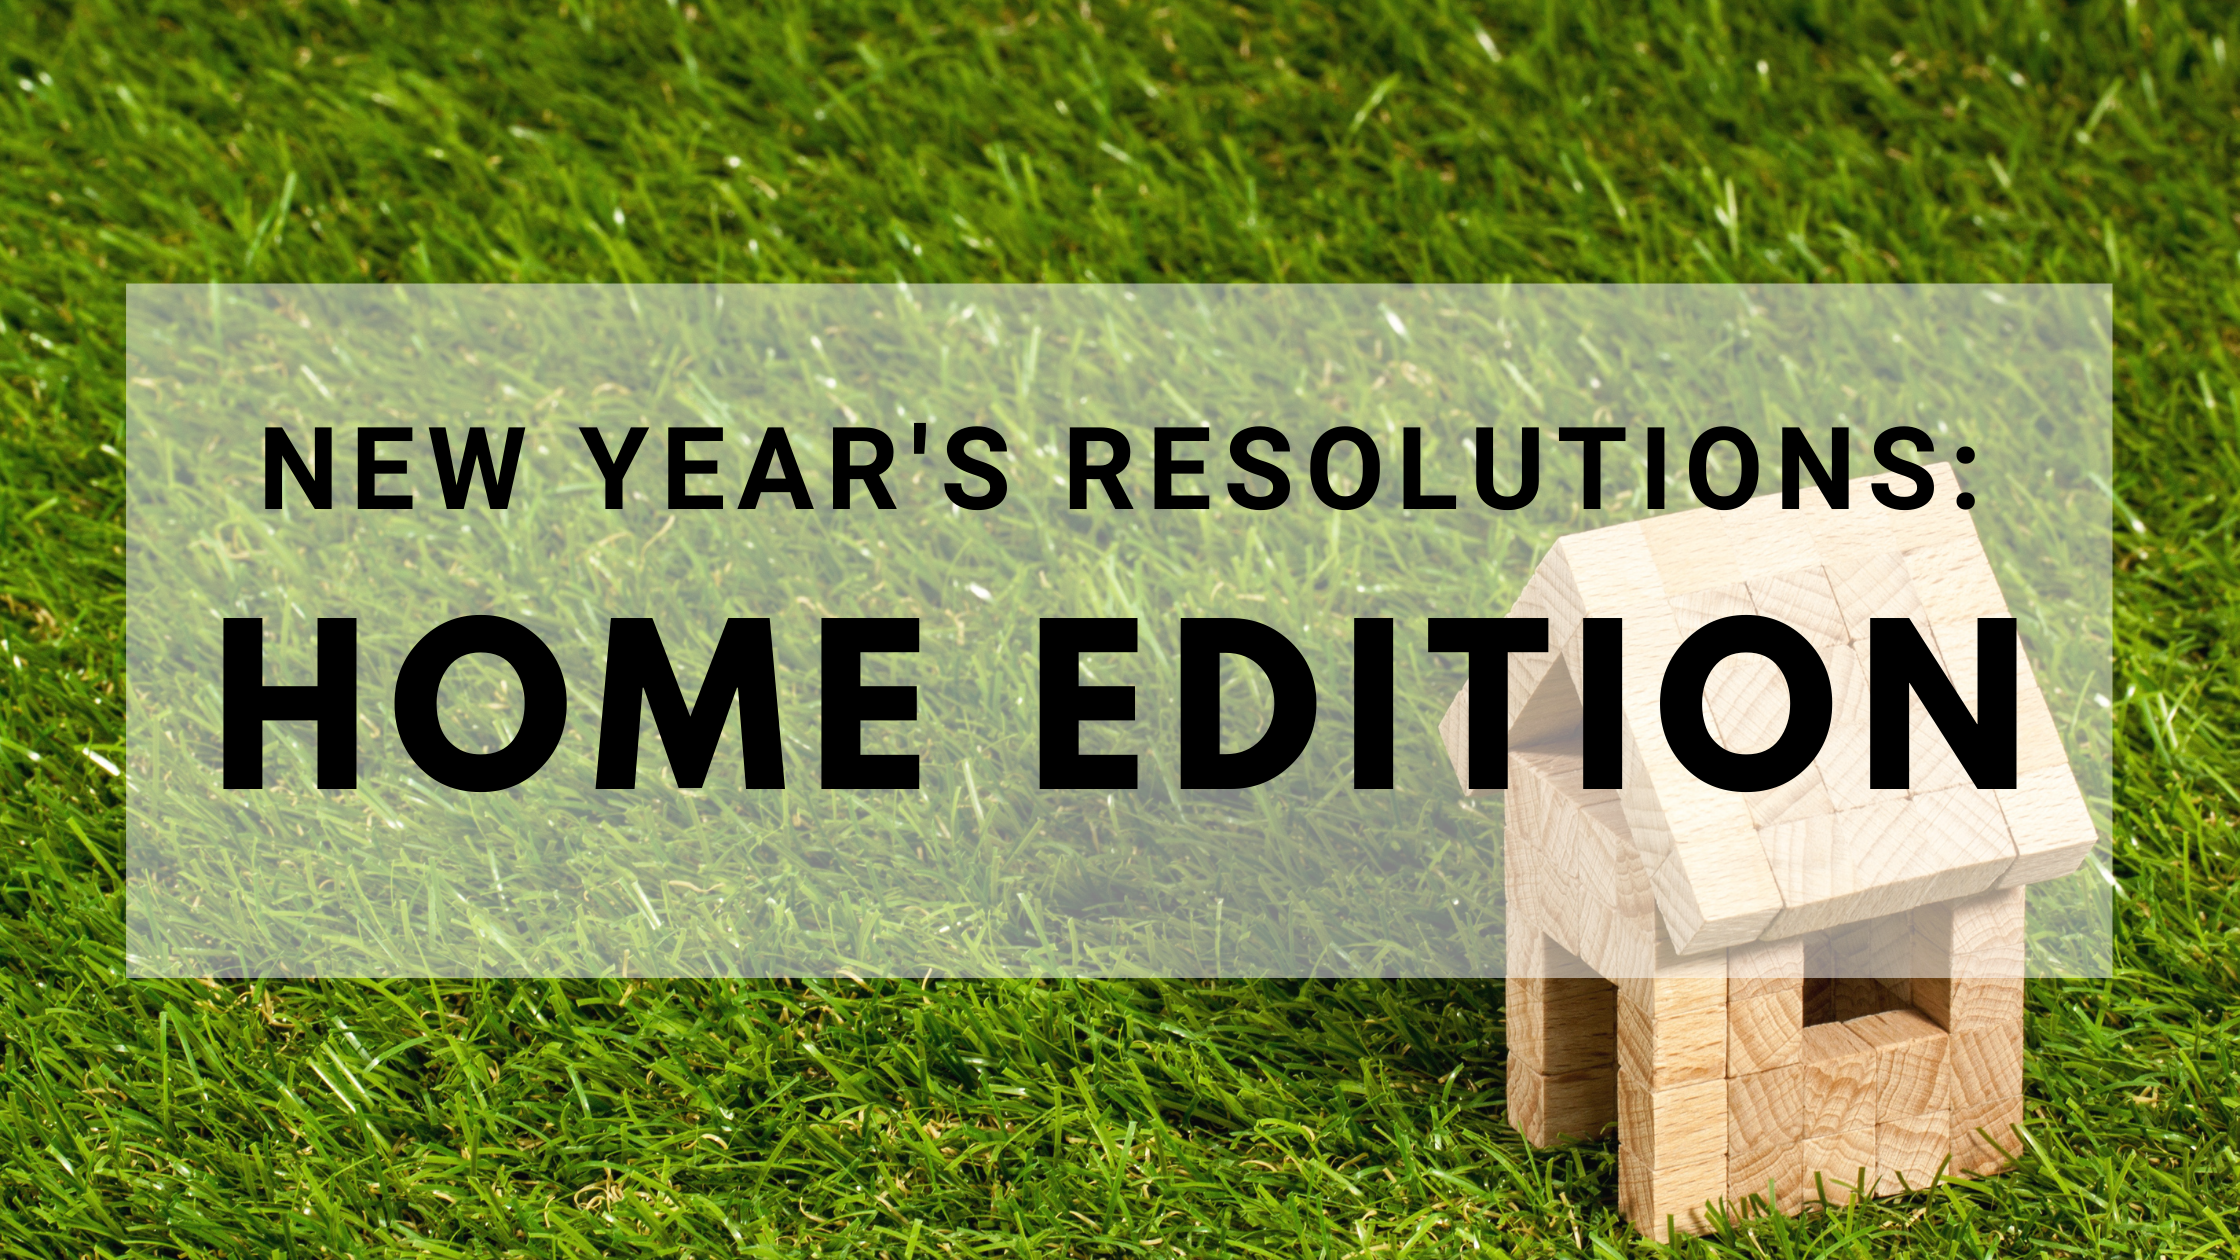 New Year’s Resolutions: Home Edition